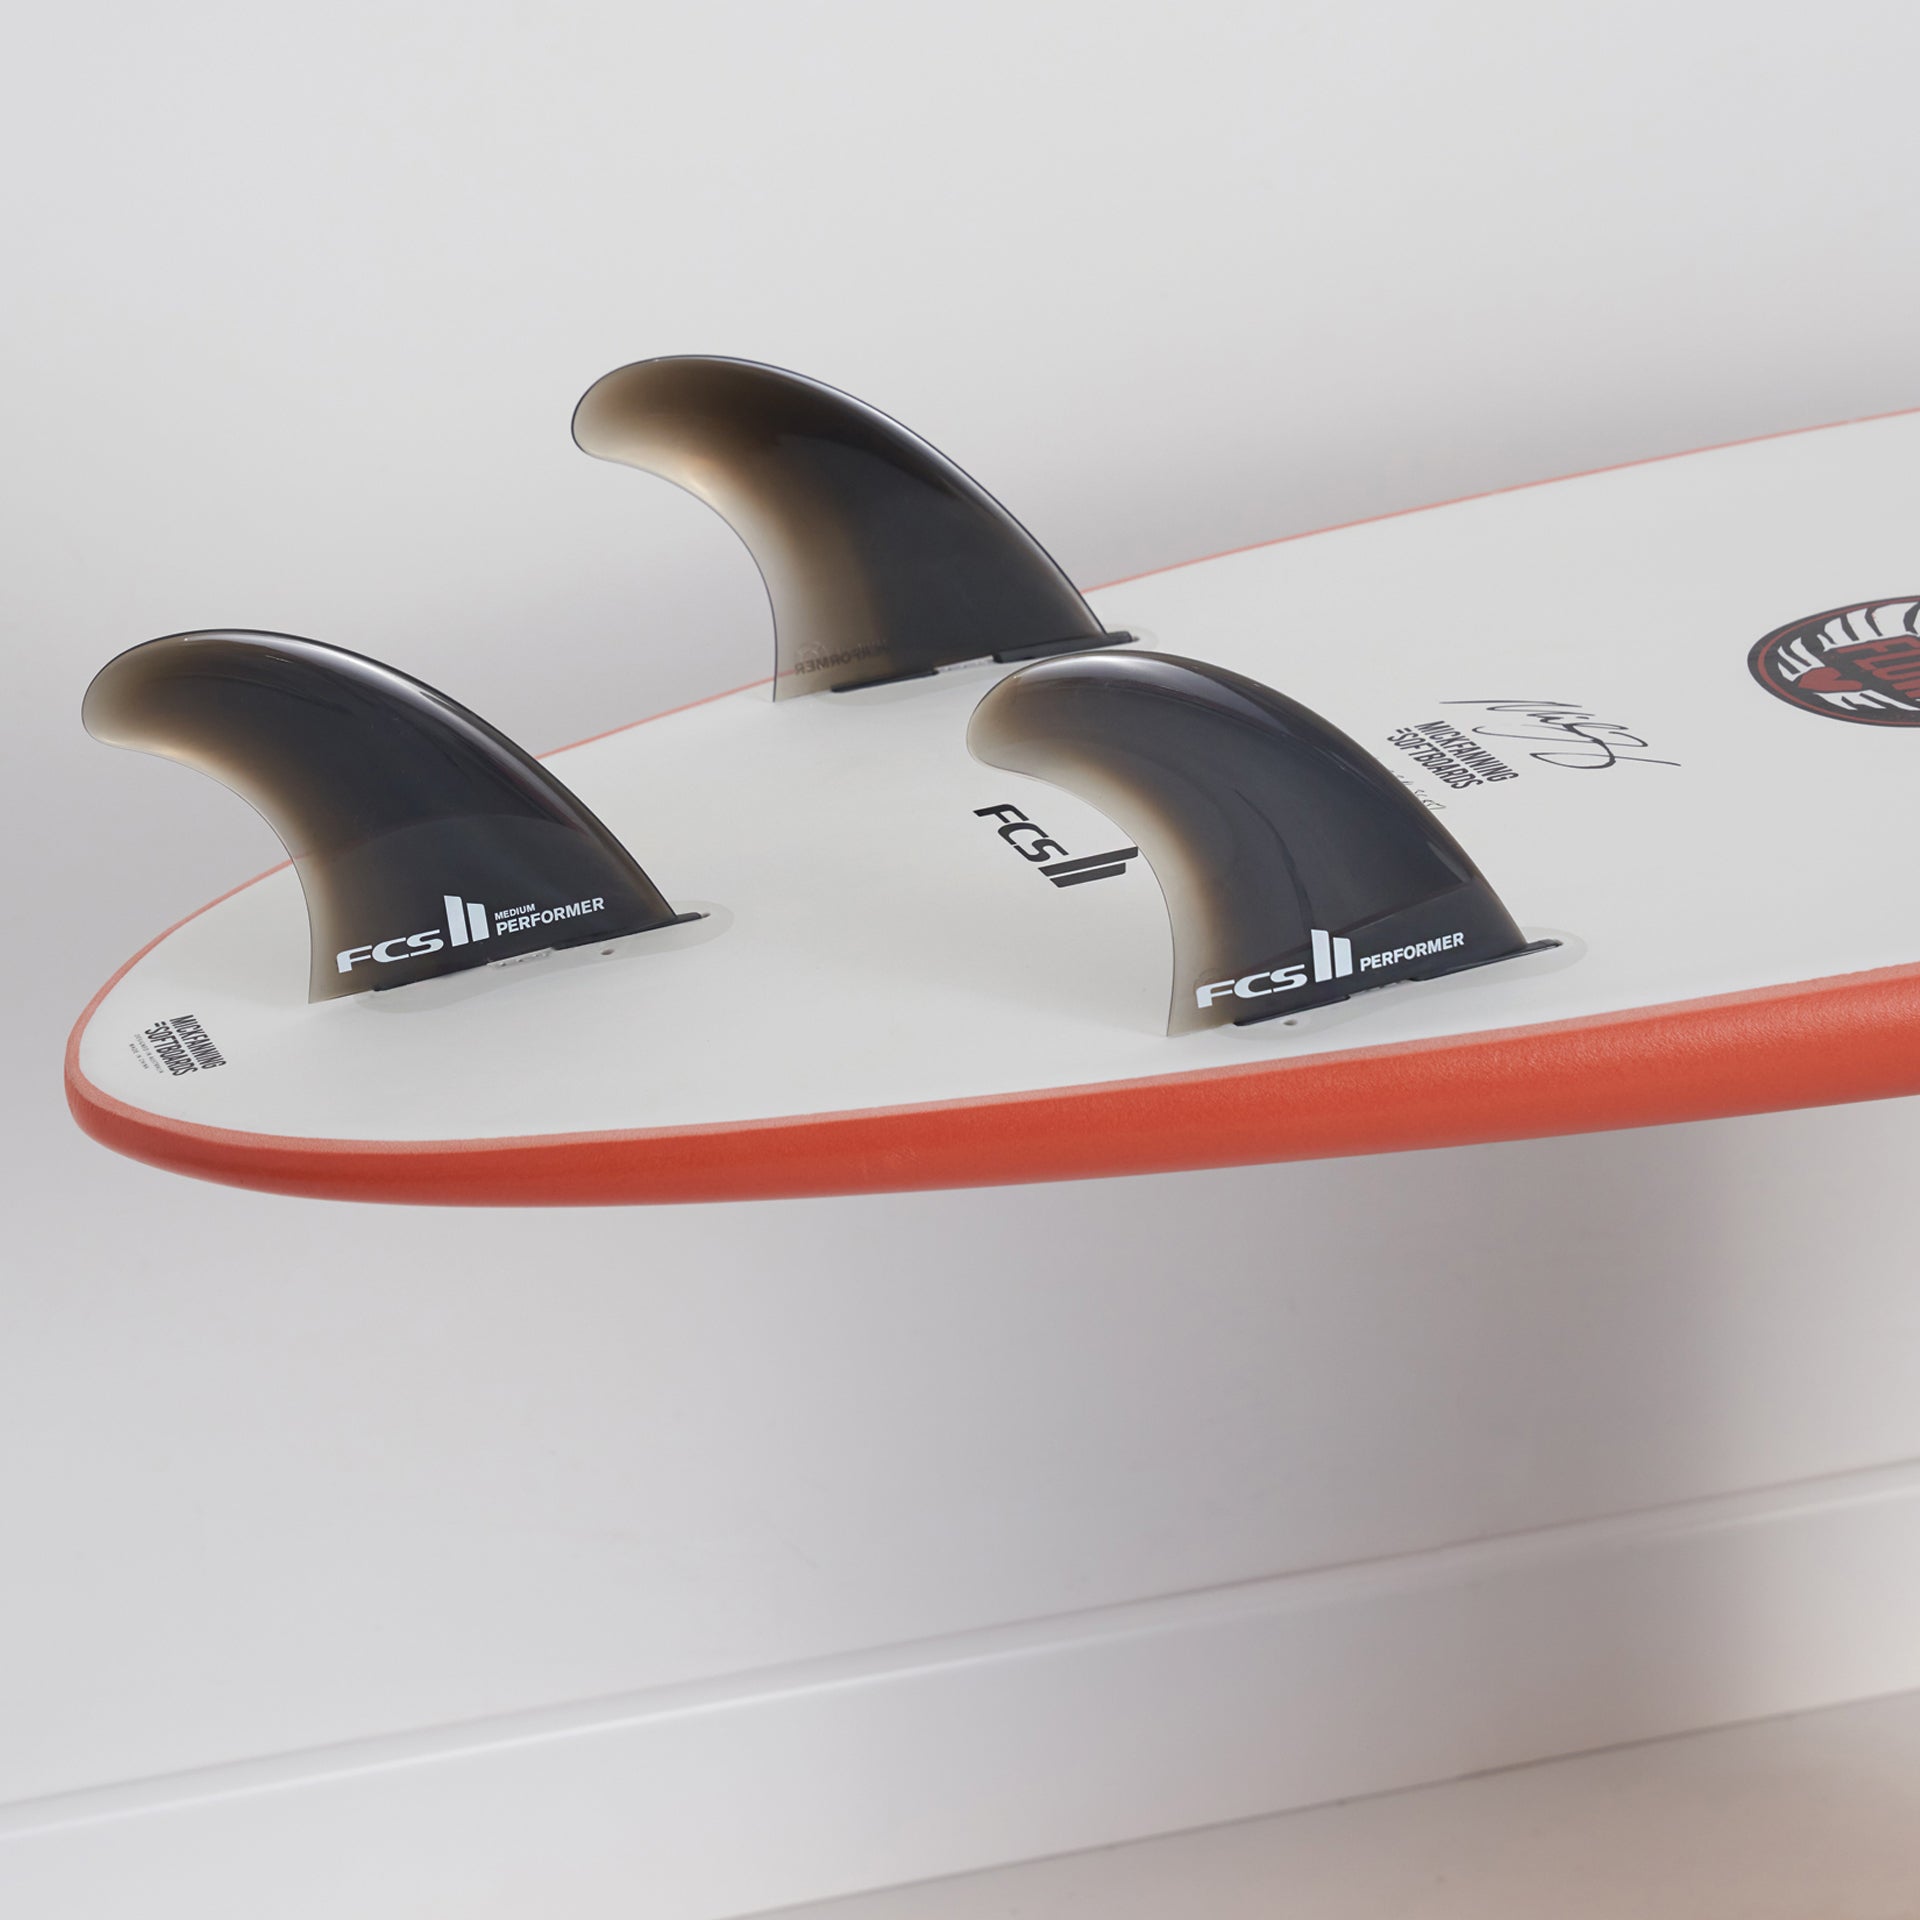 Evenflow - MF Softboard - 6&#39;6 and 7&#39;0 - Rust - ManGo Surfing